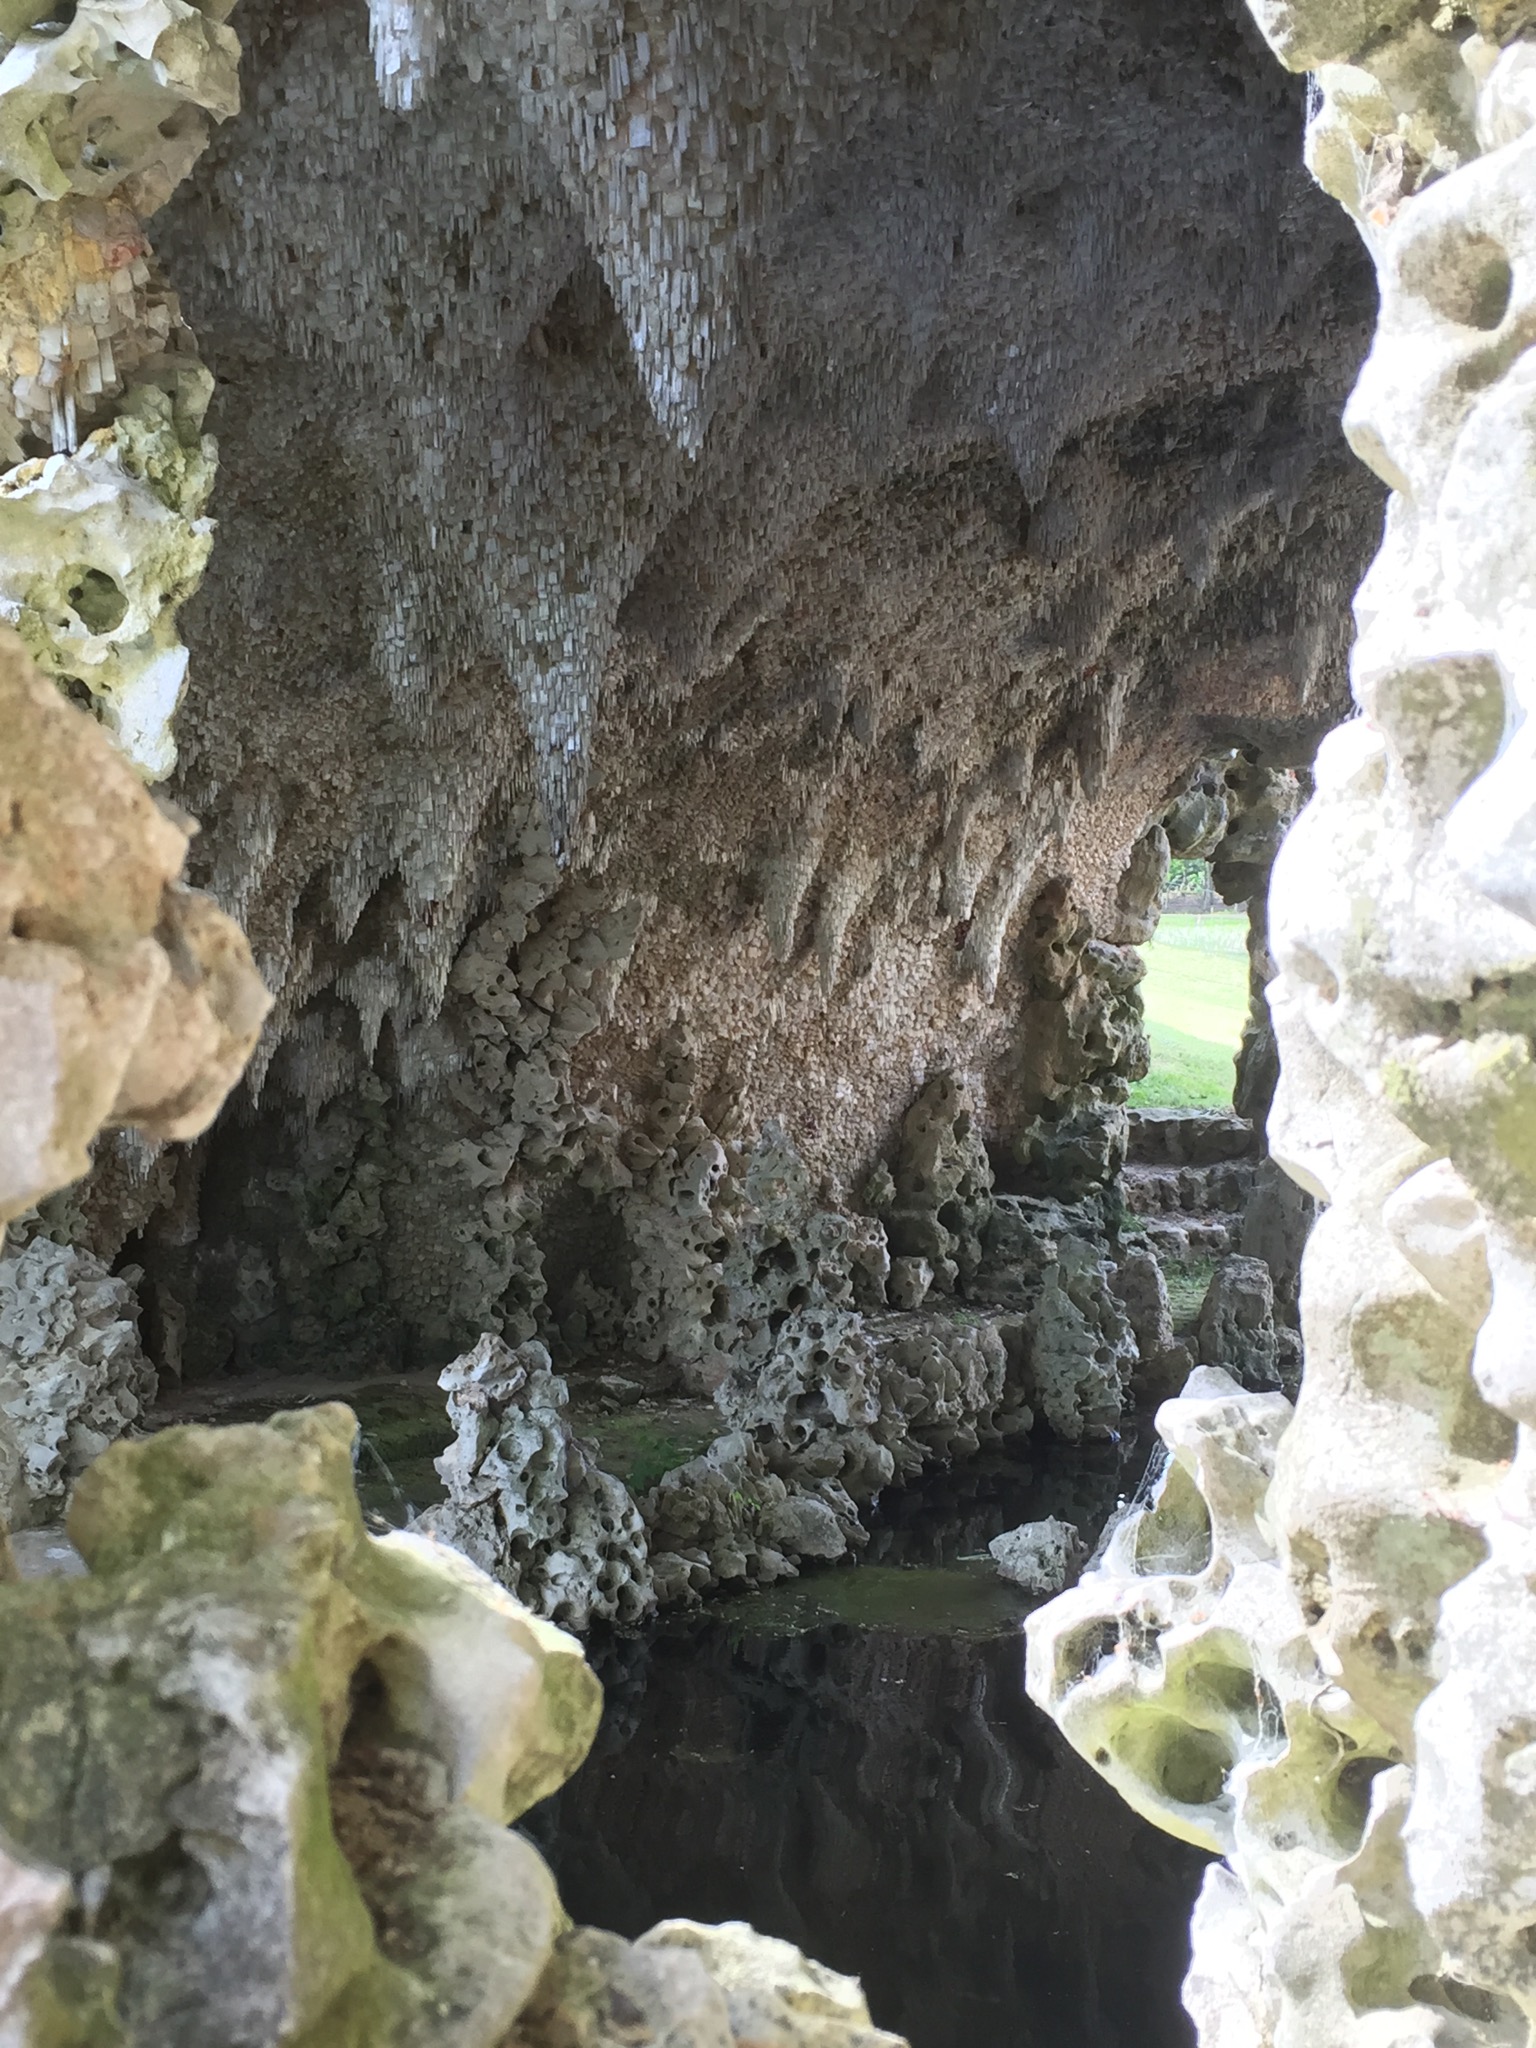 Painshill Crystal Grotto